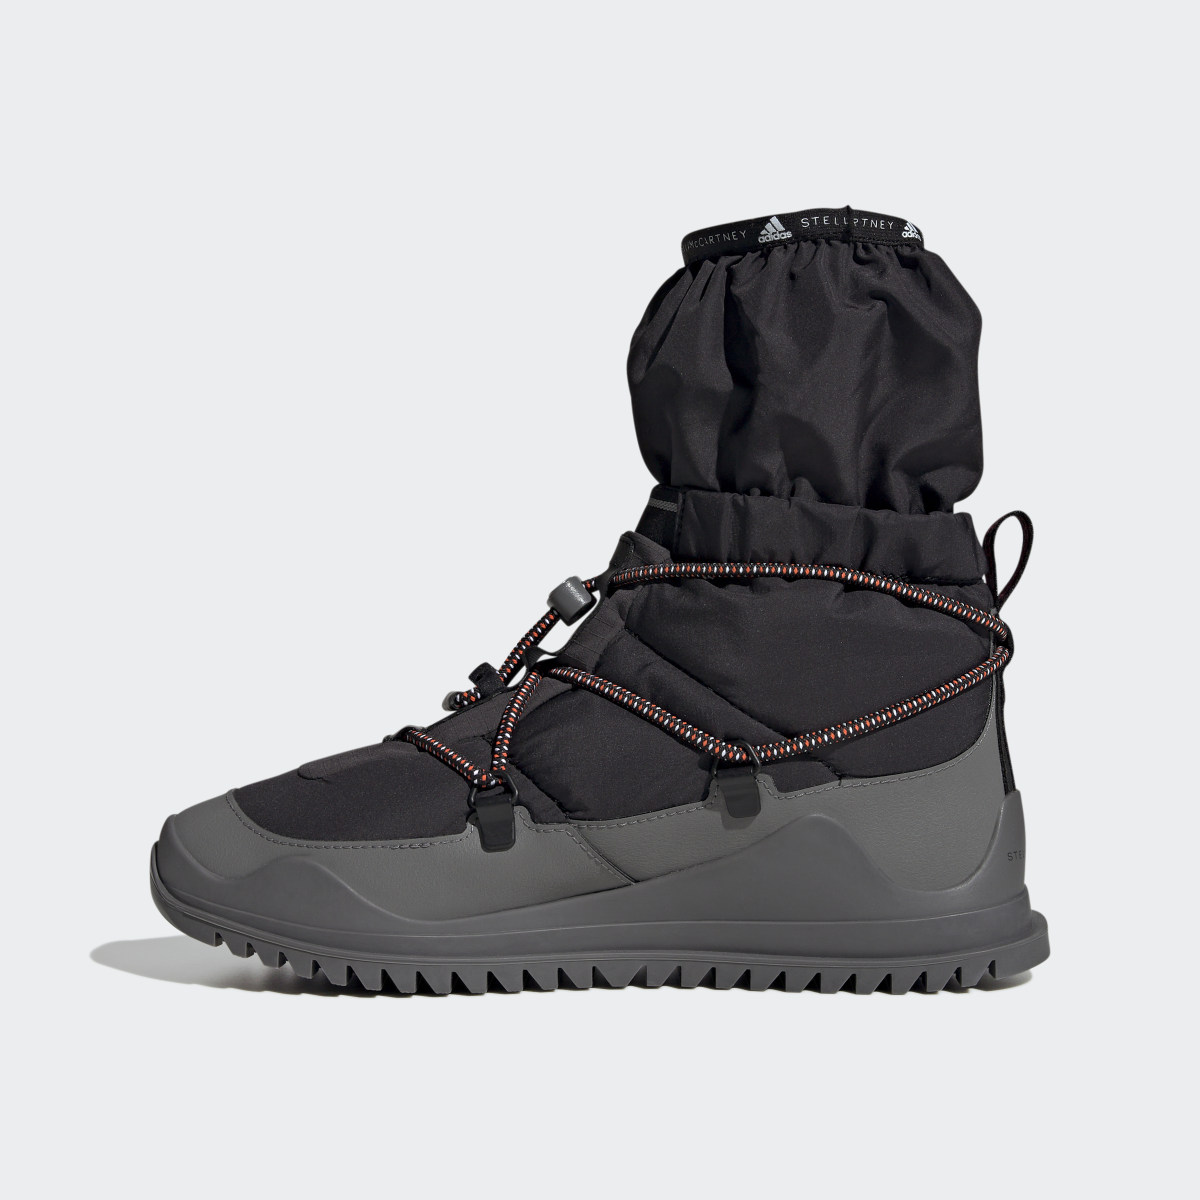 Adidas by Stella McCartney Winter COLD.RDY Boot. 7